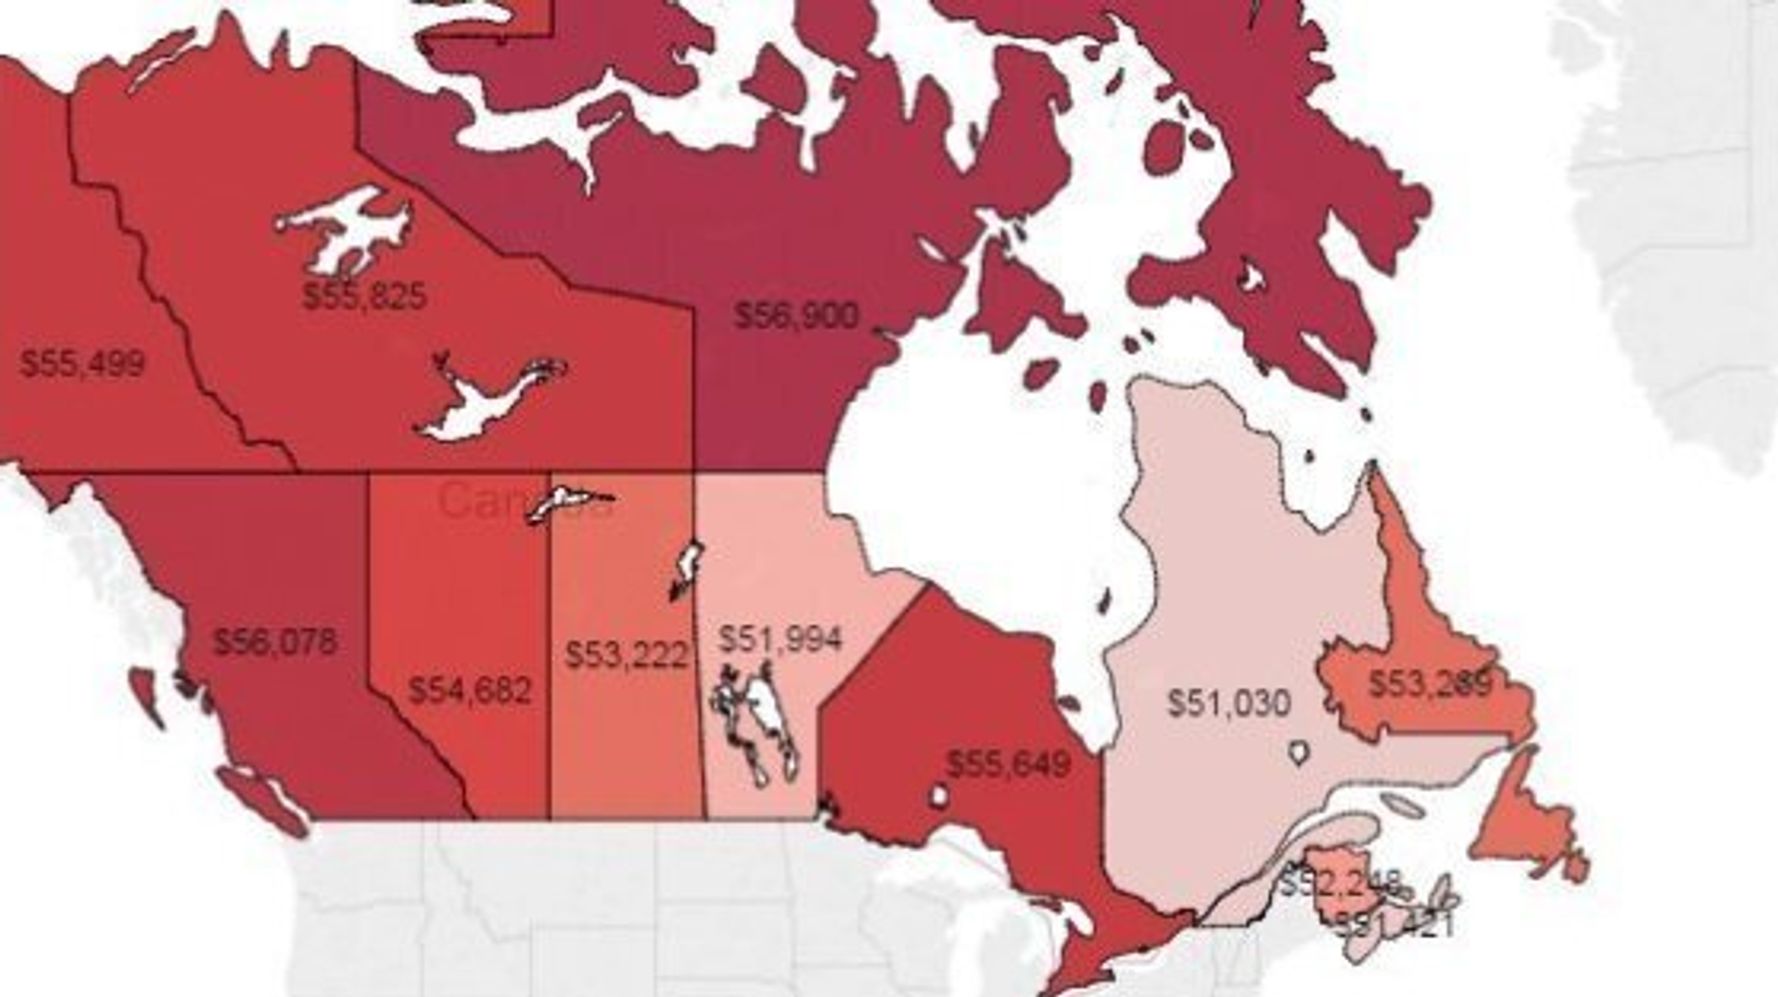 Canada Tax Deadline What You'll Pay, From 1 Province To The Next